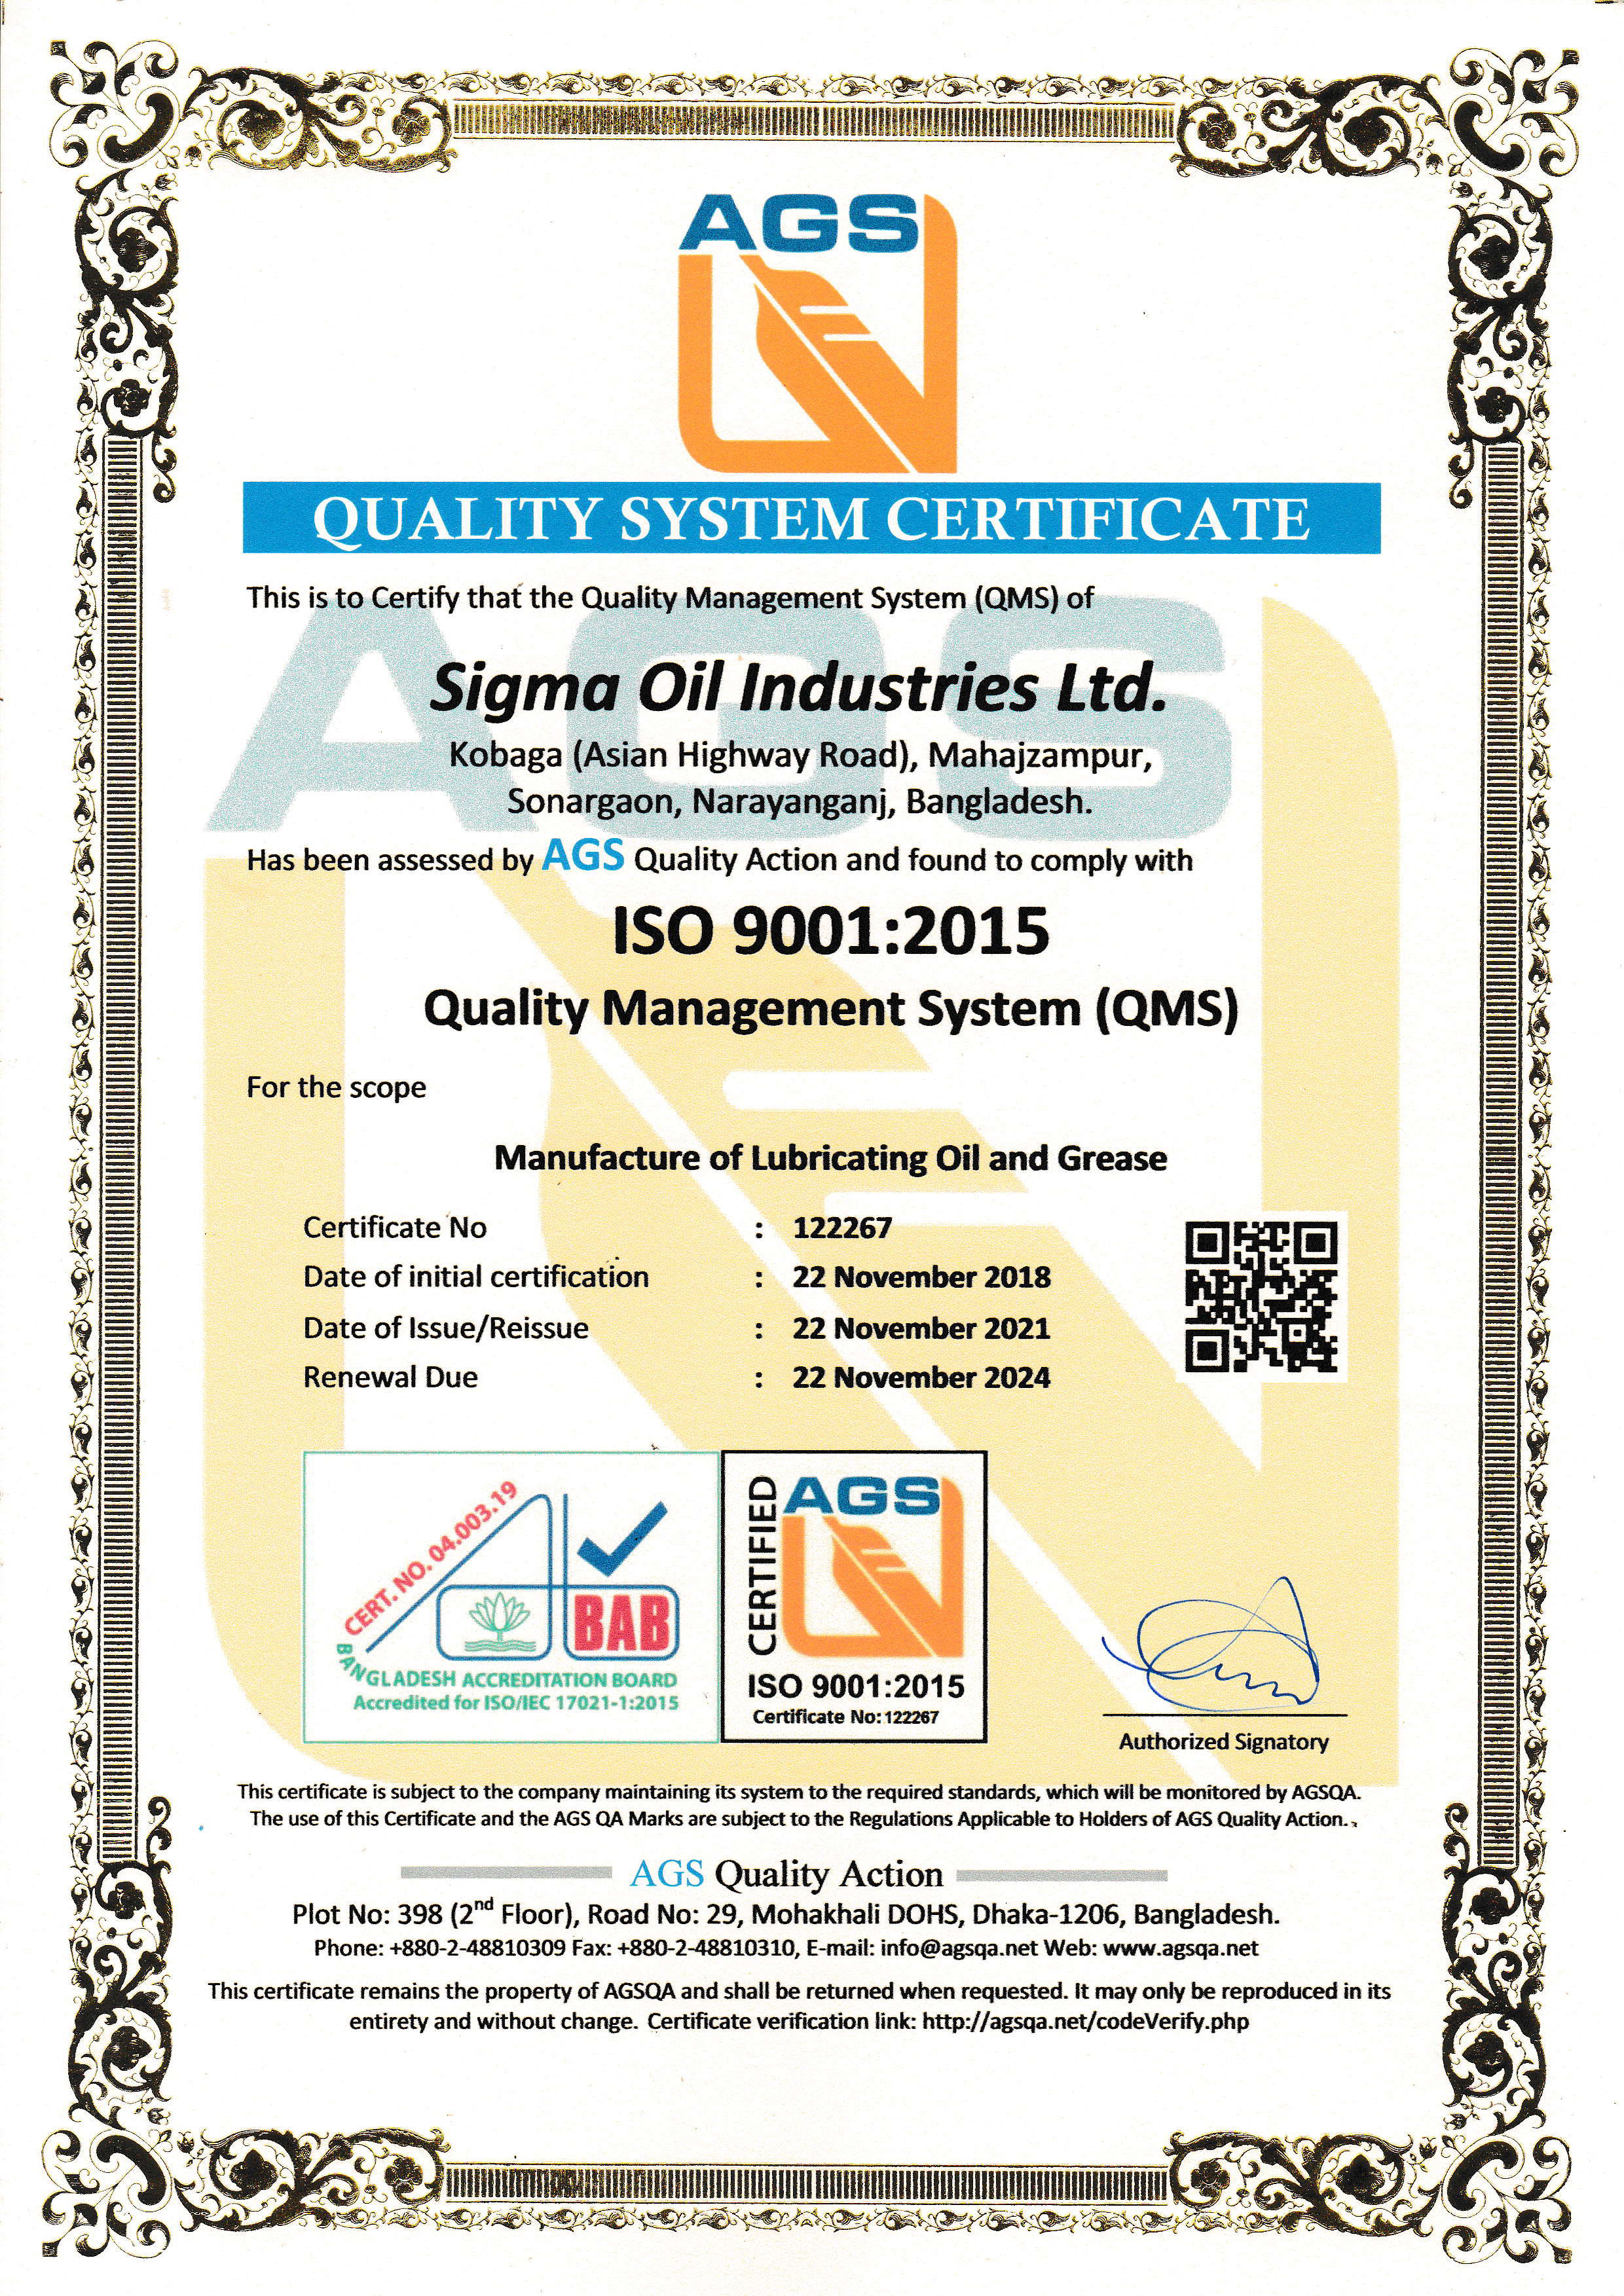 Sigma Oil Industries Limited Certification